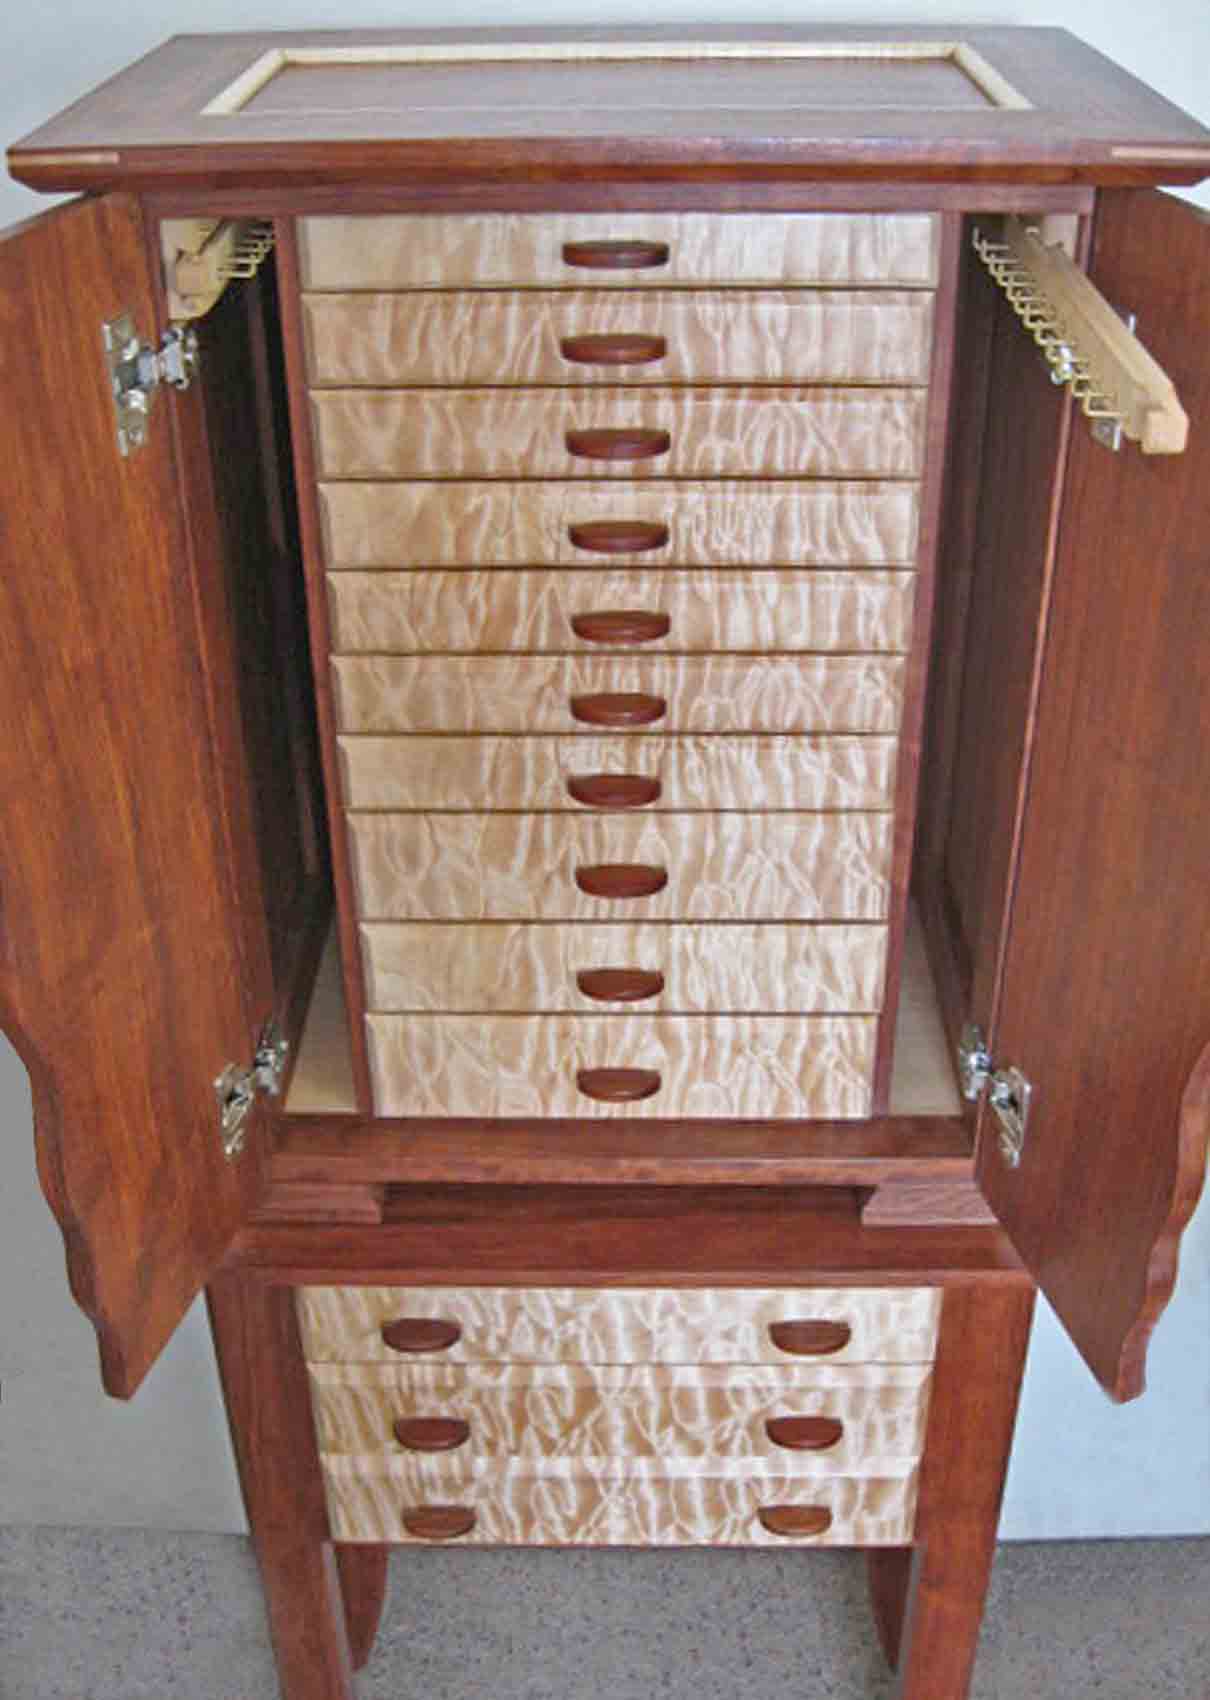 Standing Armoire Jewelry Box with drawers and doors open